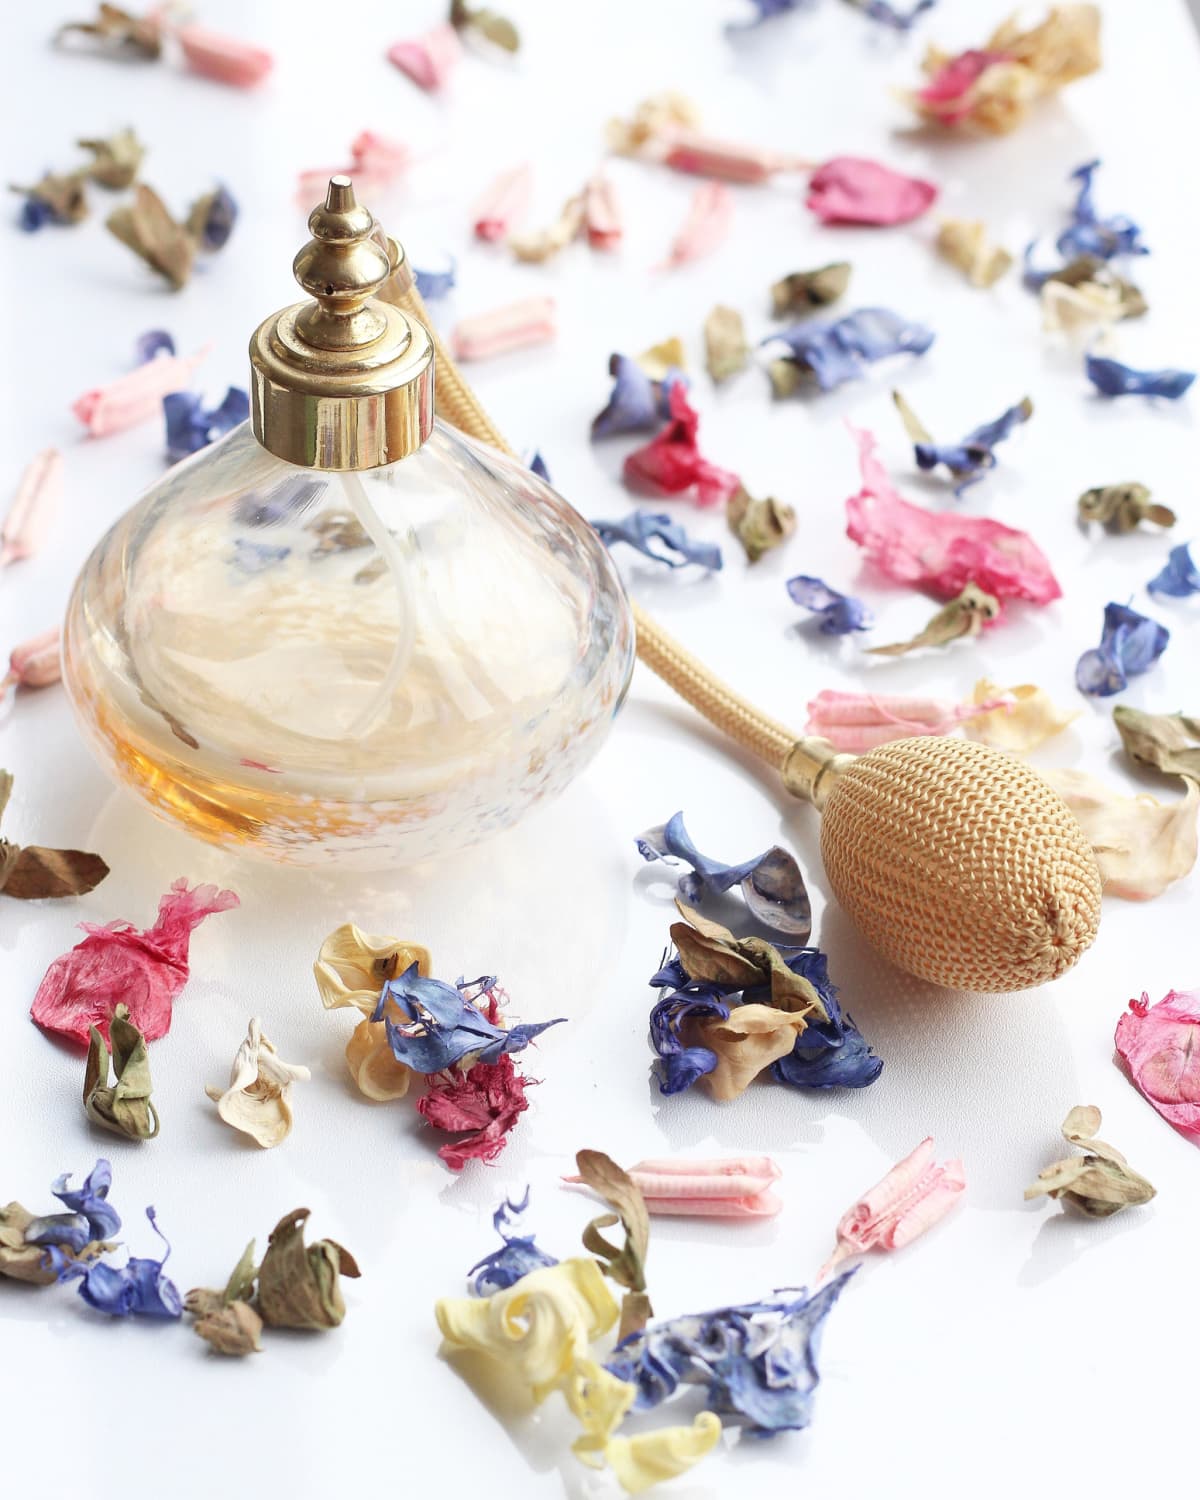 Perfume bottle surrounded by flower petals